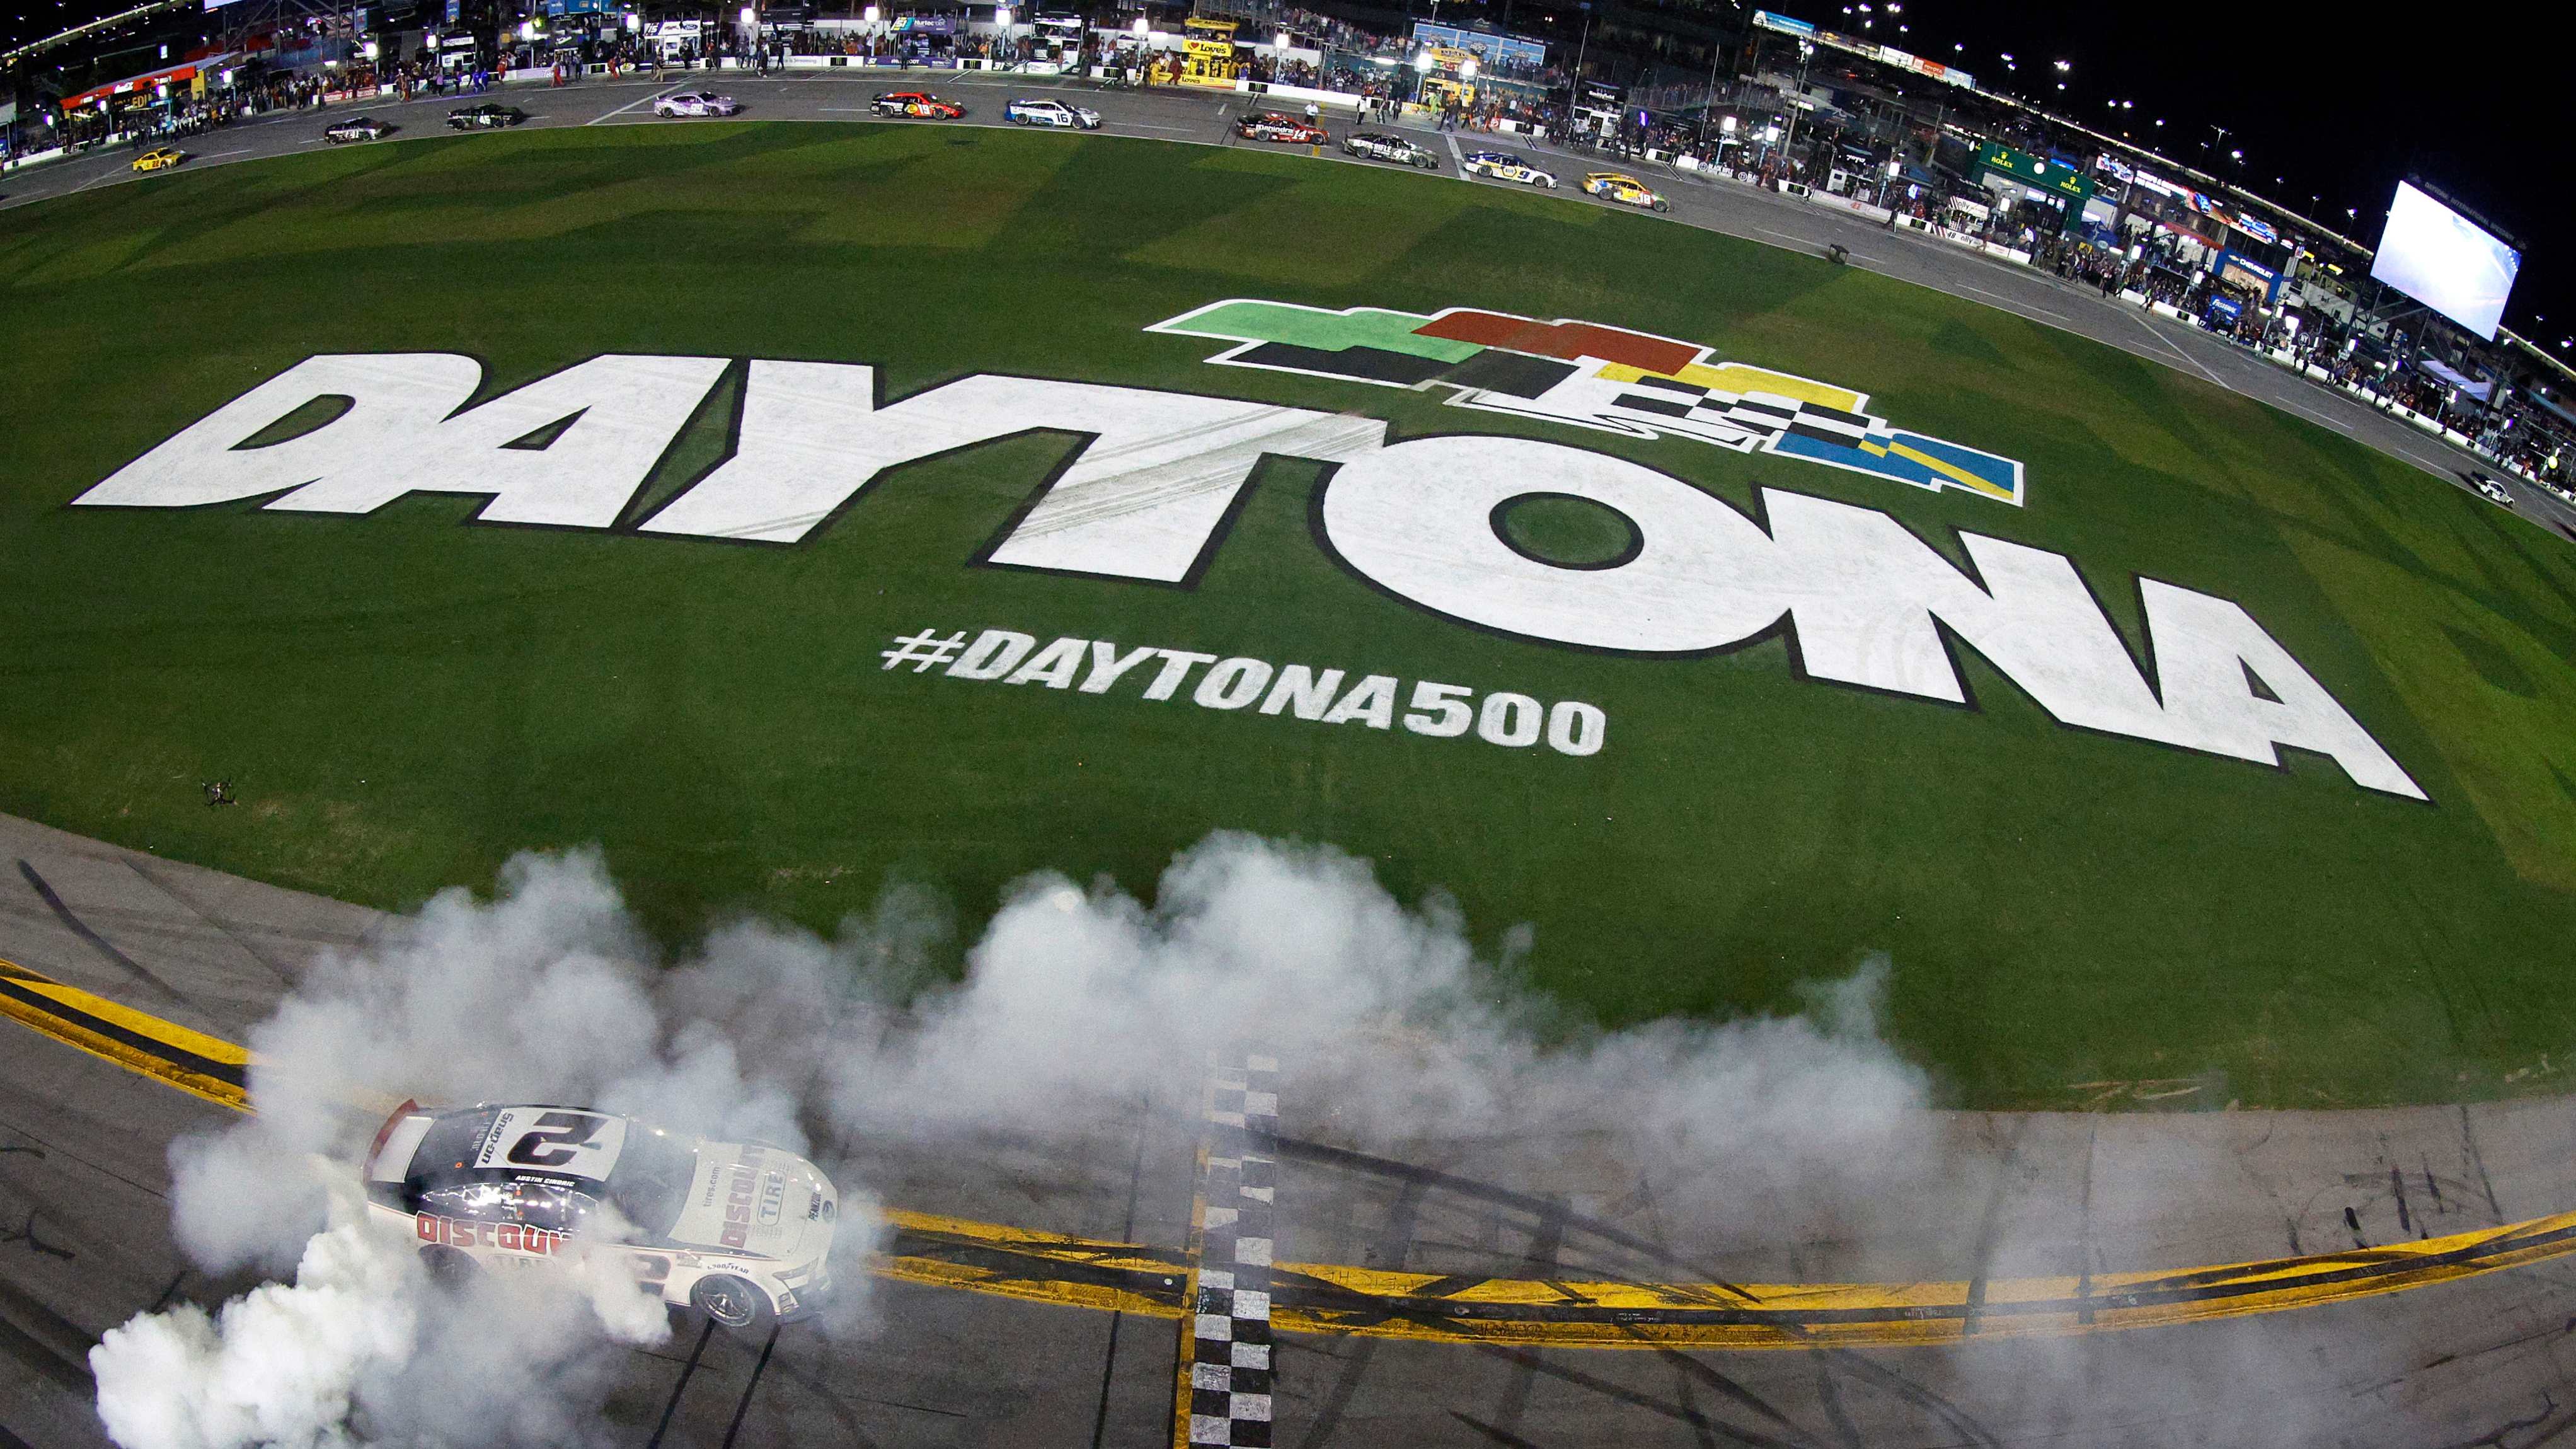 How to Watch the 2023 Daytona 500 Schedule, Date, TV Info, Tickets